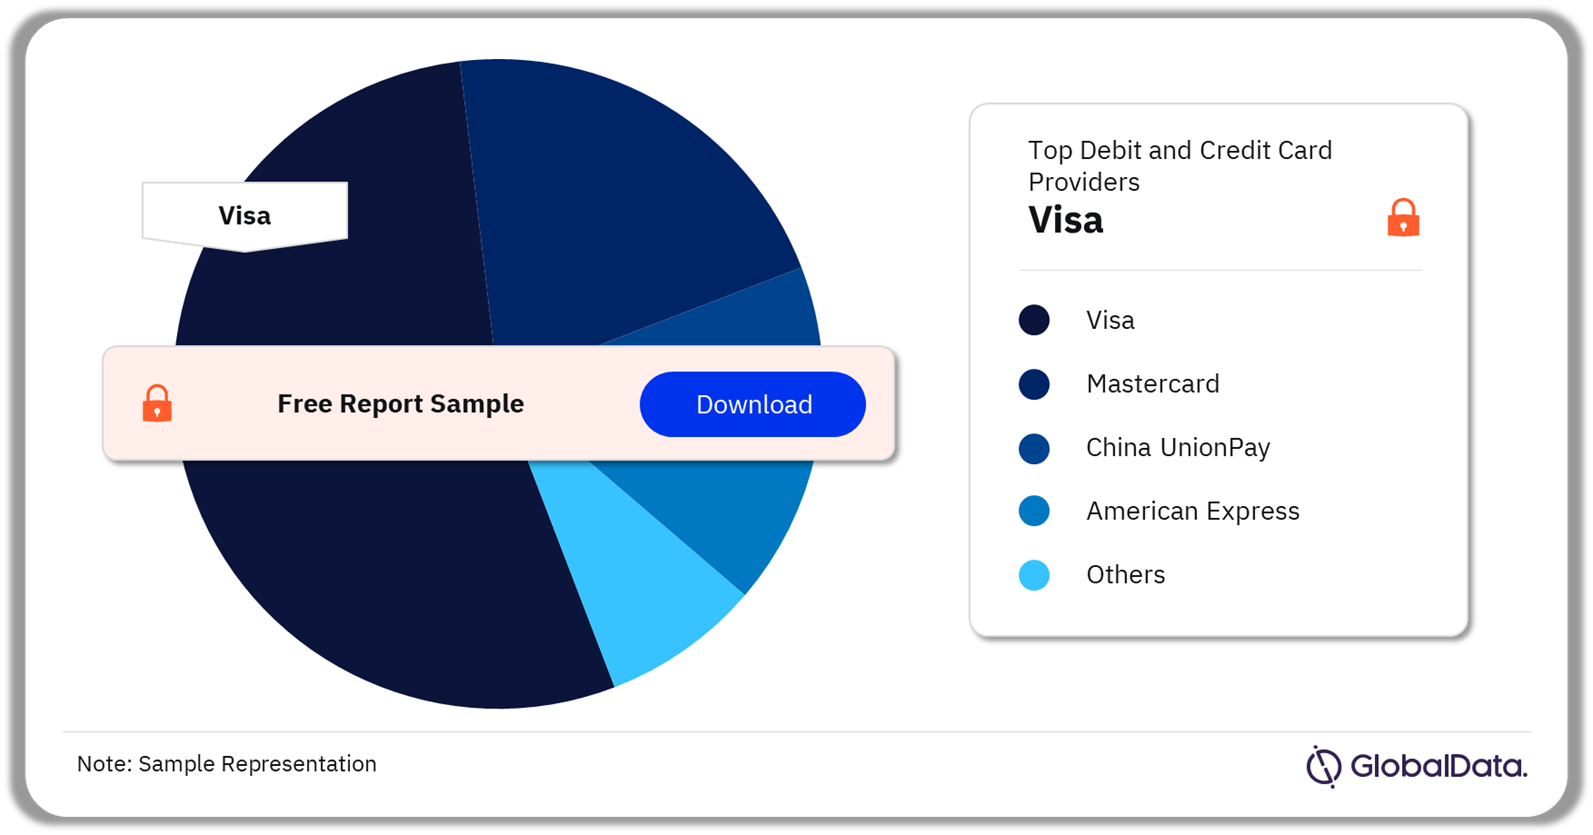 South Korea Cards and Payments Market Analysis by Debt and Credit Card Providers, 2023 (%)